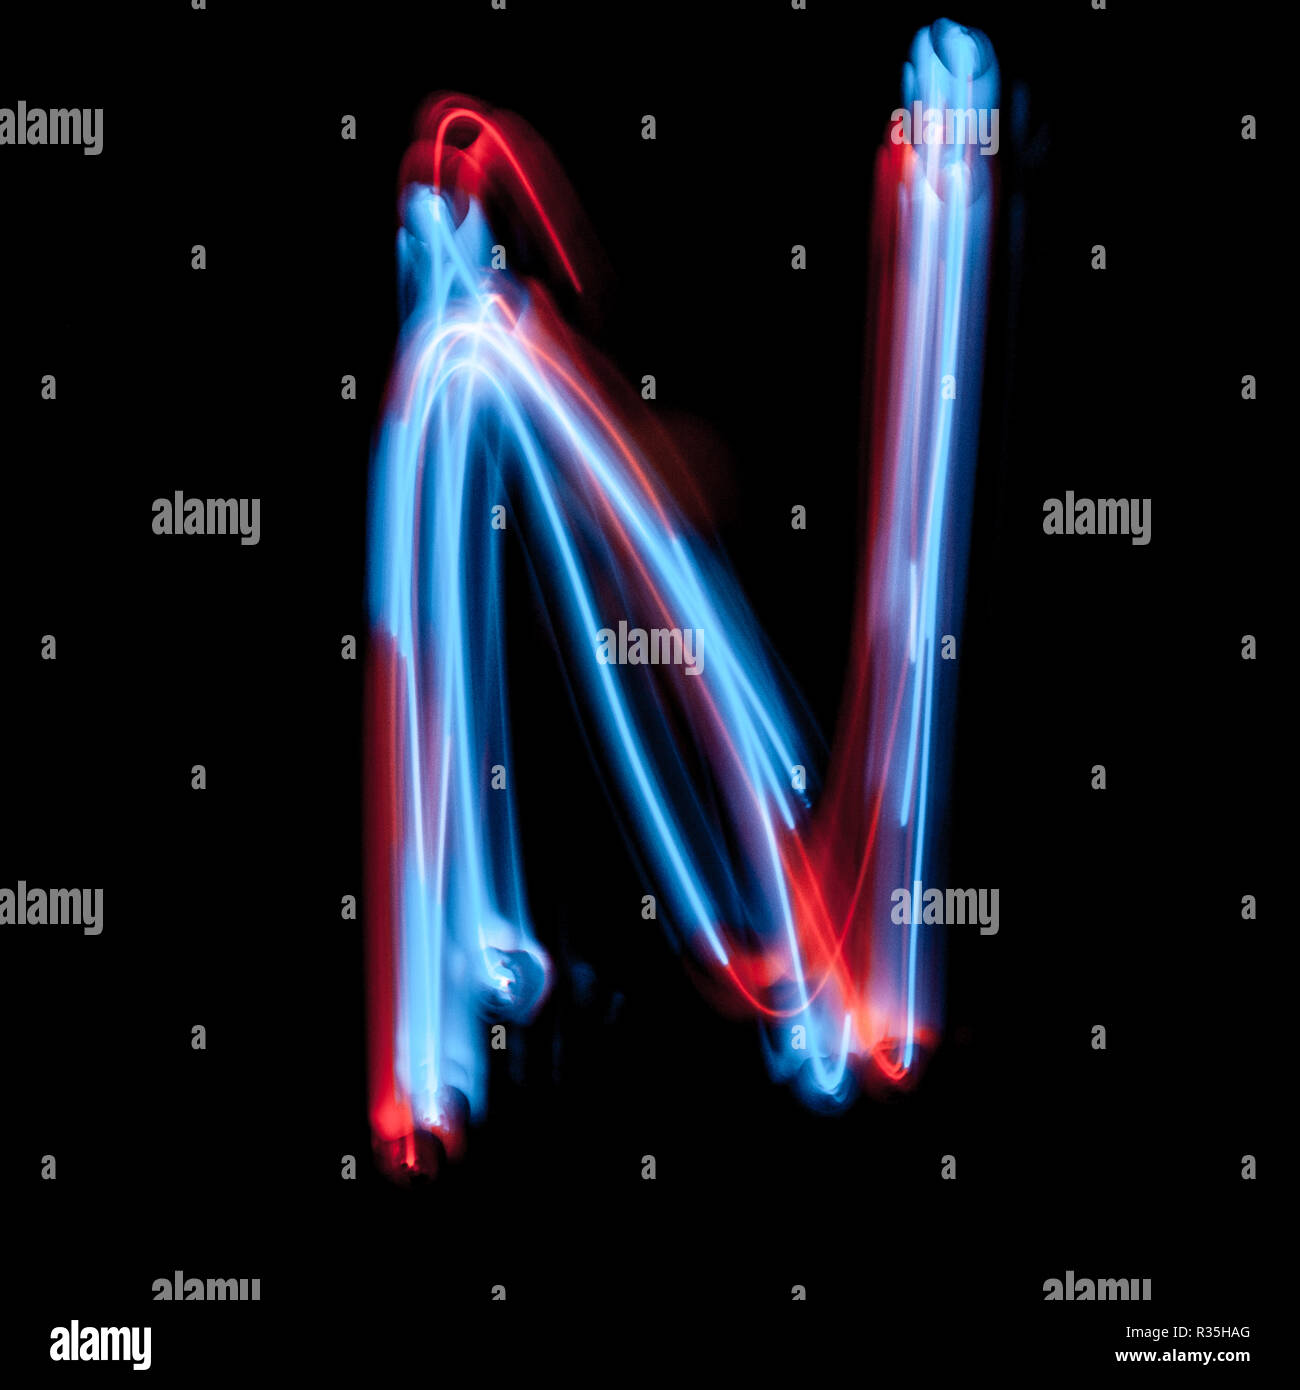 Letter N of the alphabet made from neon sign. The blue light image, long  exposure with colored fairy lights, against a black background Stock Photo  - Alamy